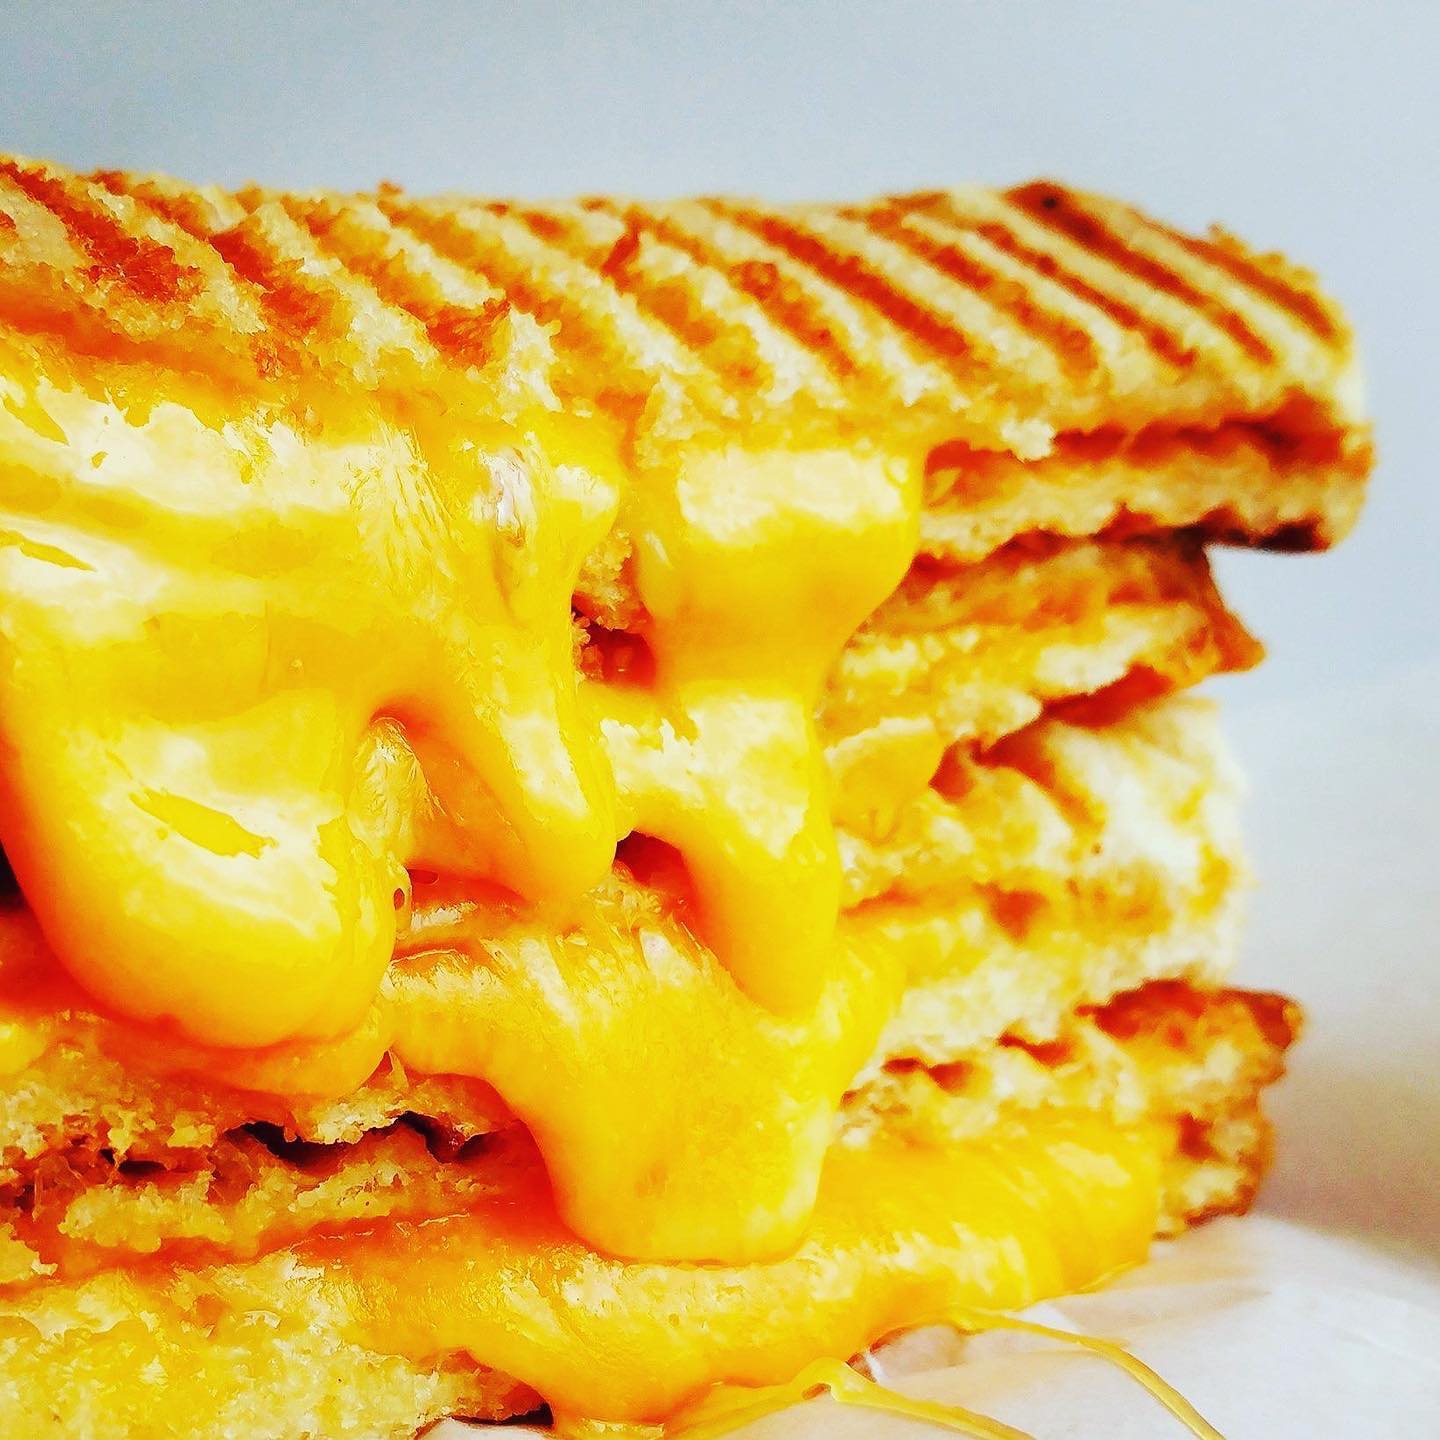 Food Truck: What Would Cheesus Do